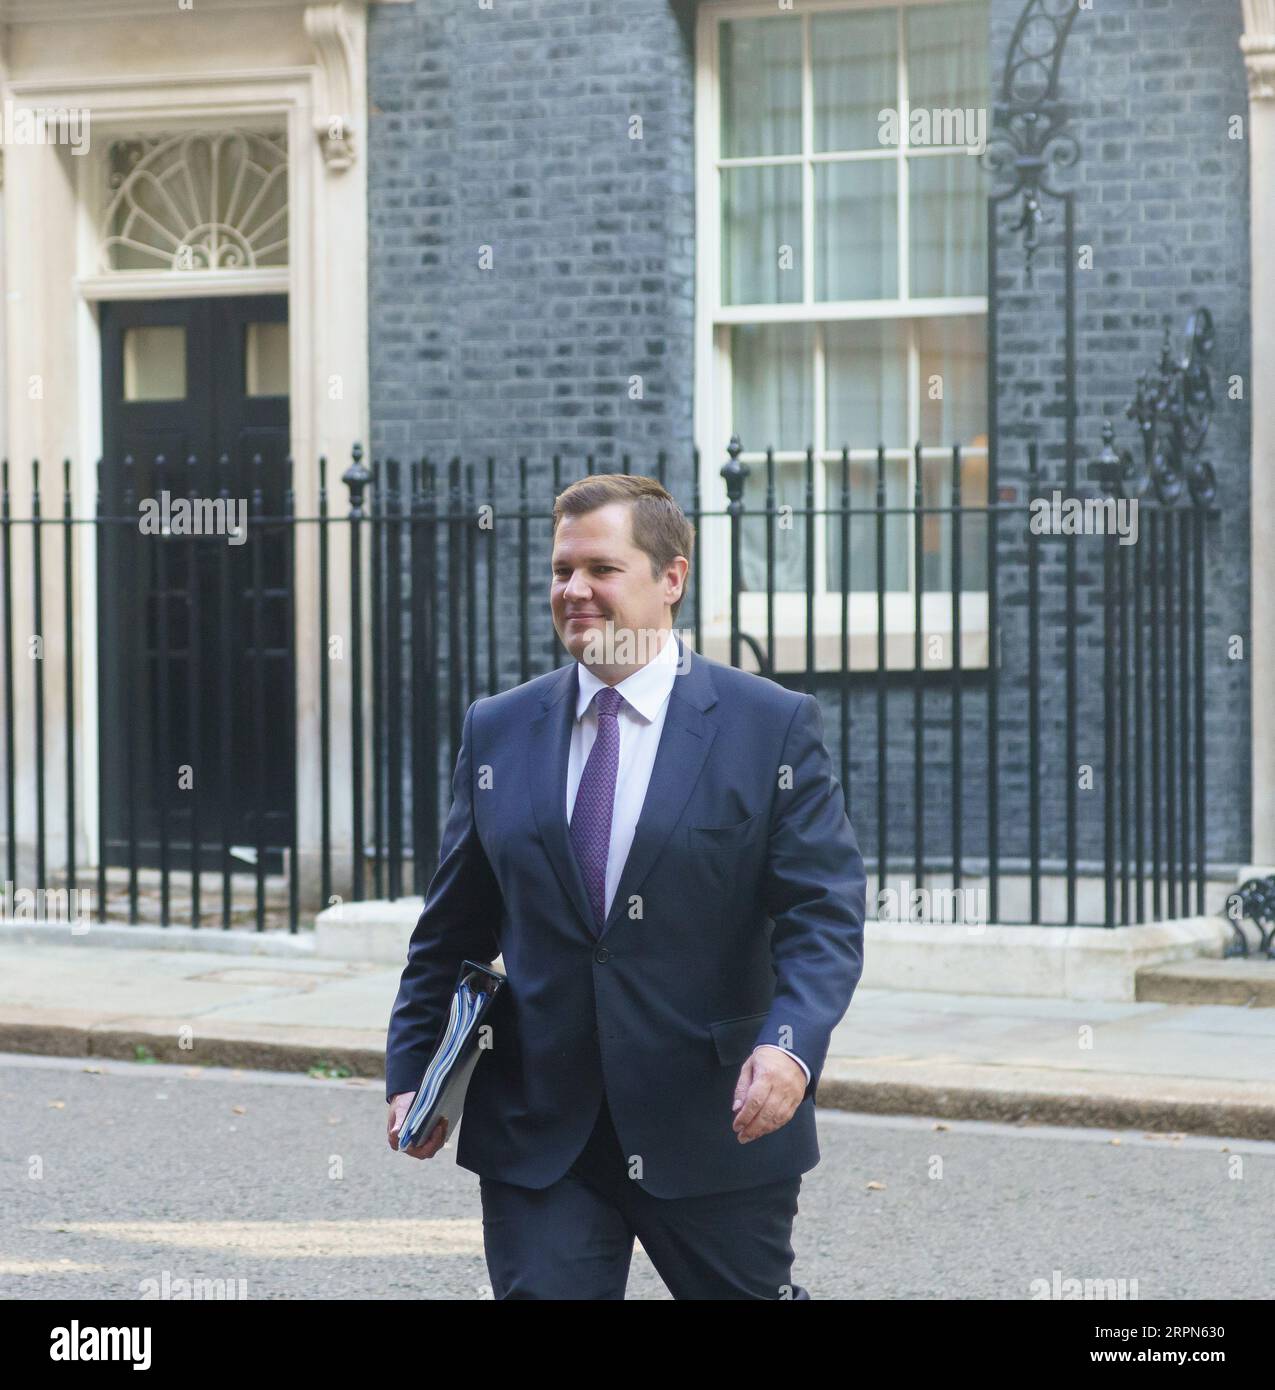 Westminster, London. 5th September 2023. Cabinet minsters leave Downing Street following the first Cabinet meeting since the summer recess. PICTURED: Rt Hon Robert Jenrick Minister of State (Home Office) (Immigration) Bridget Catterall AlamyLiveNews. Stock Photo